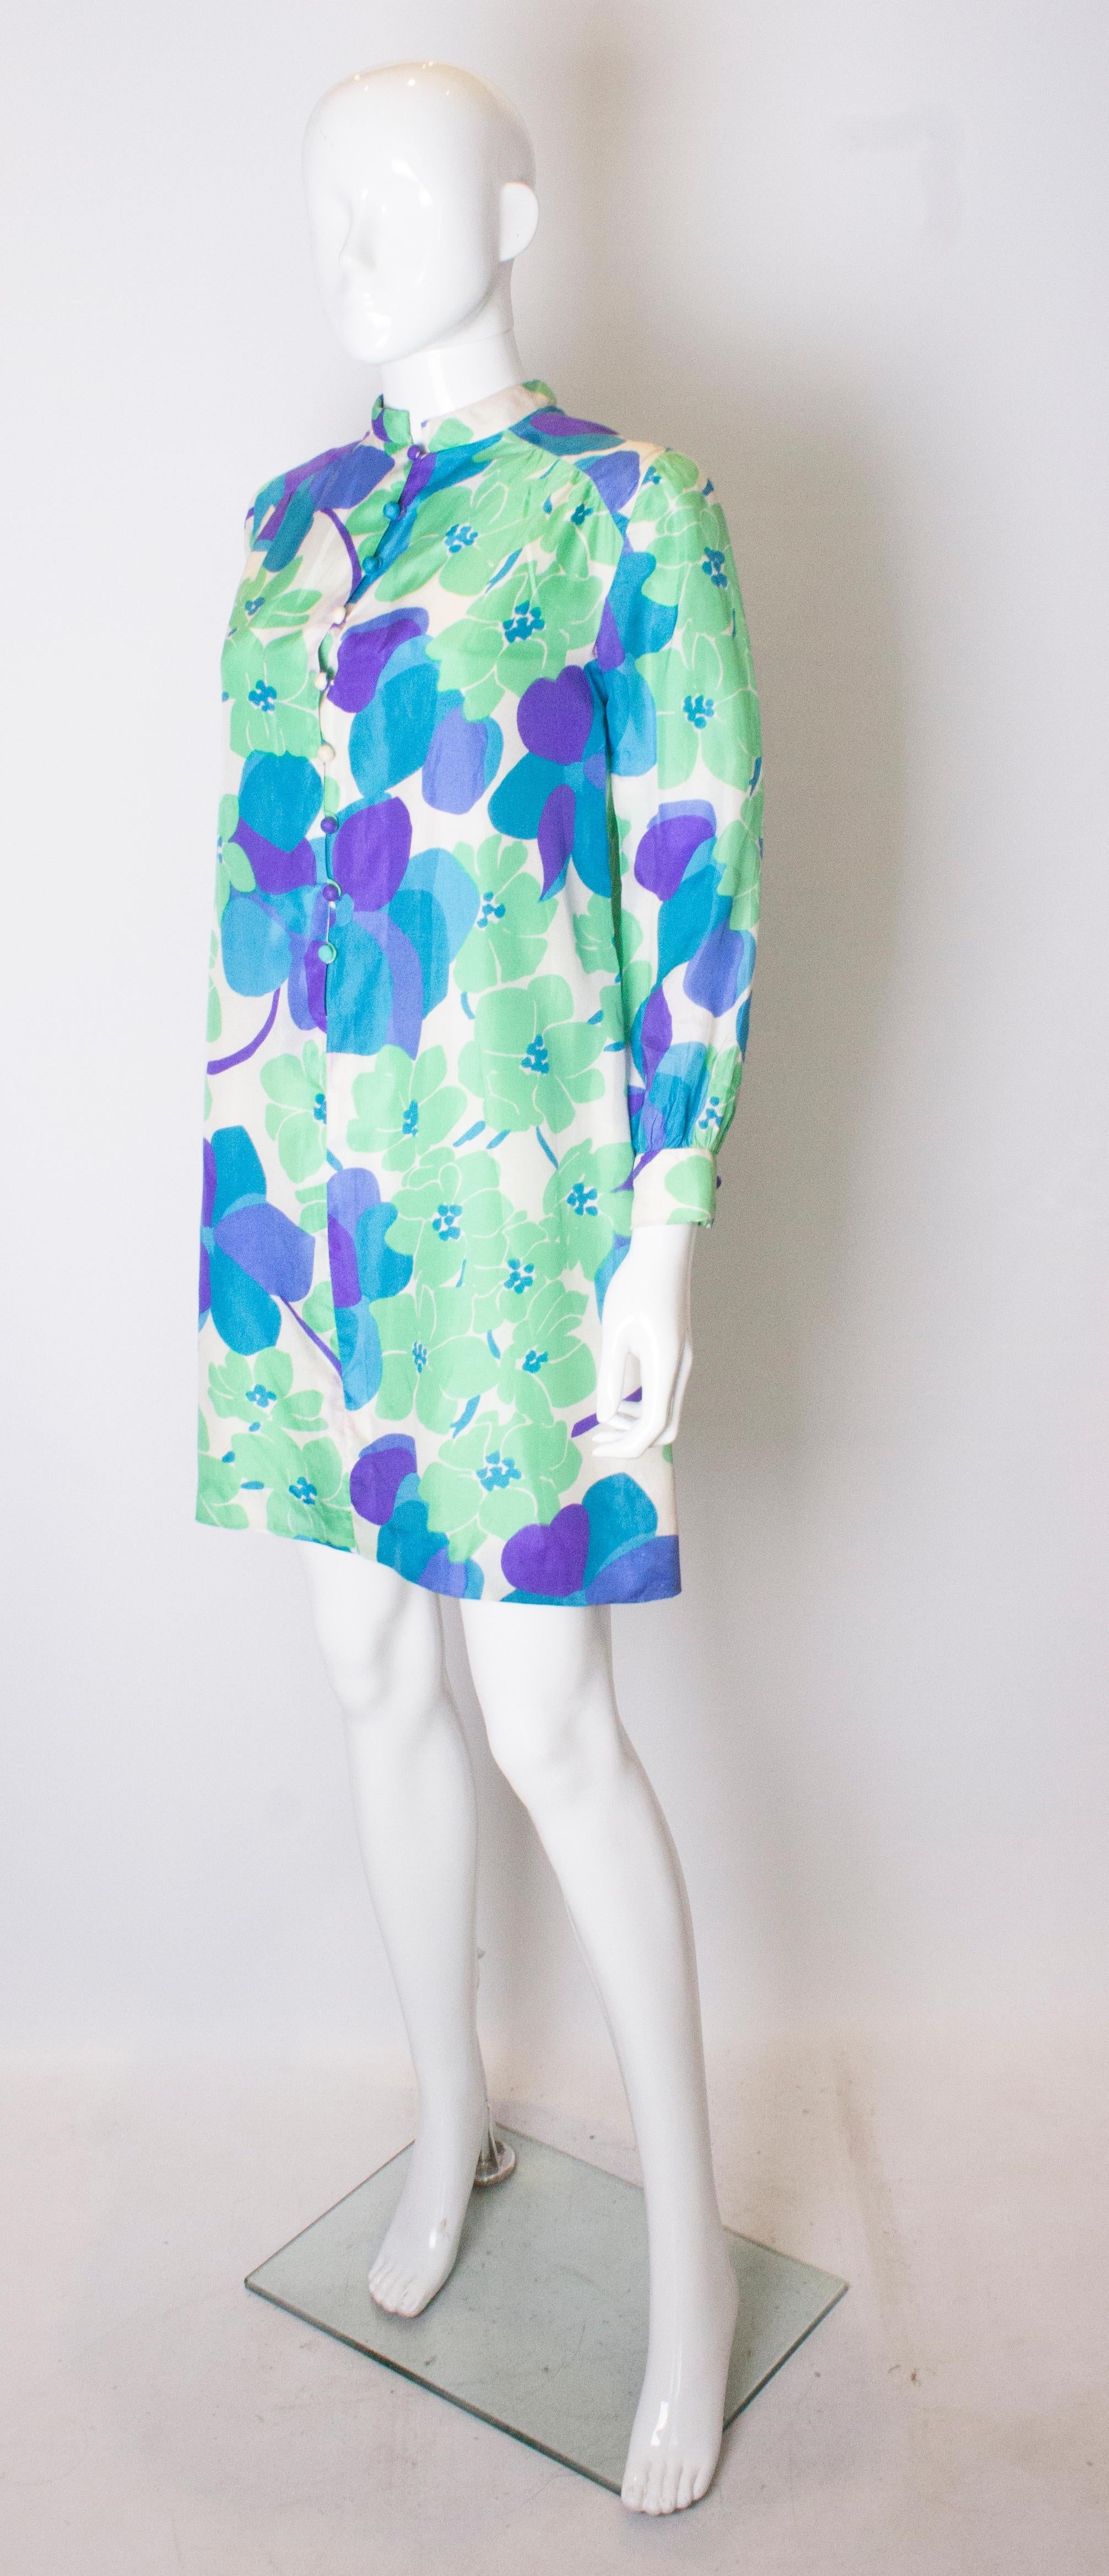 A colourful vintage silk shirt /tunic by Marcel Fenez.  The shirt is in a bright print of green, purple and blue. It has a 2 button cuff, 9 button front opening and small stand up collar. It is fully lined.
